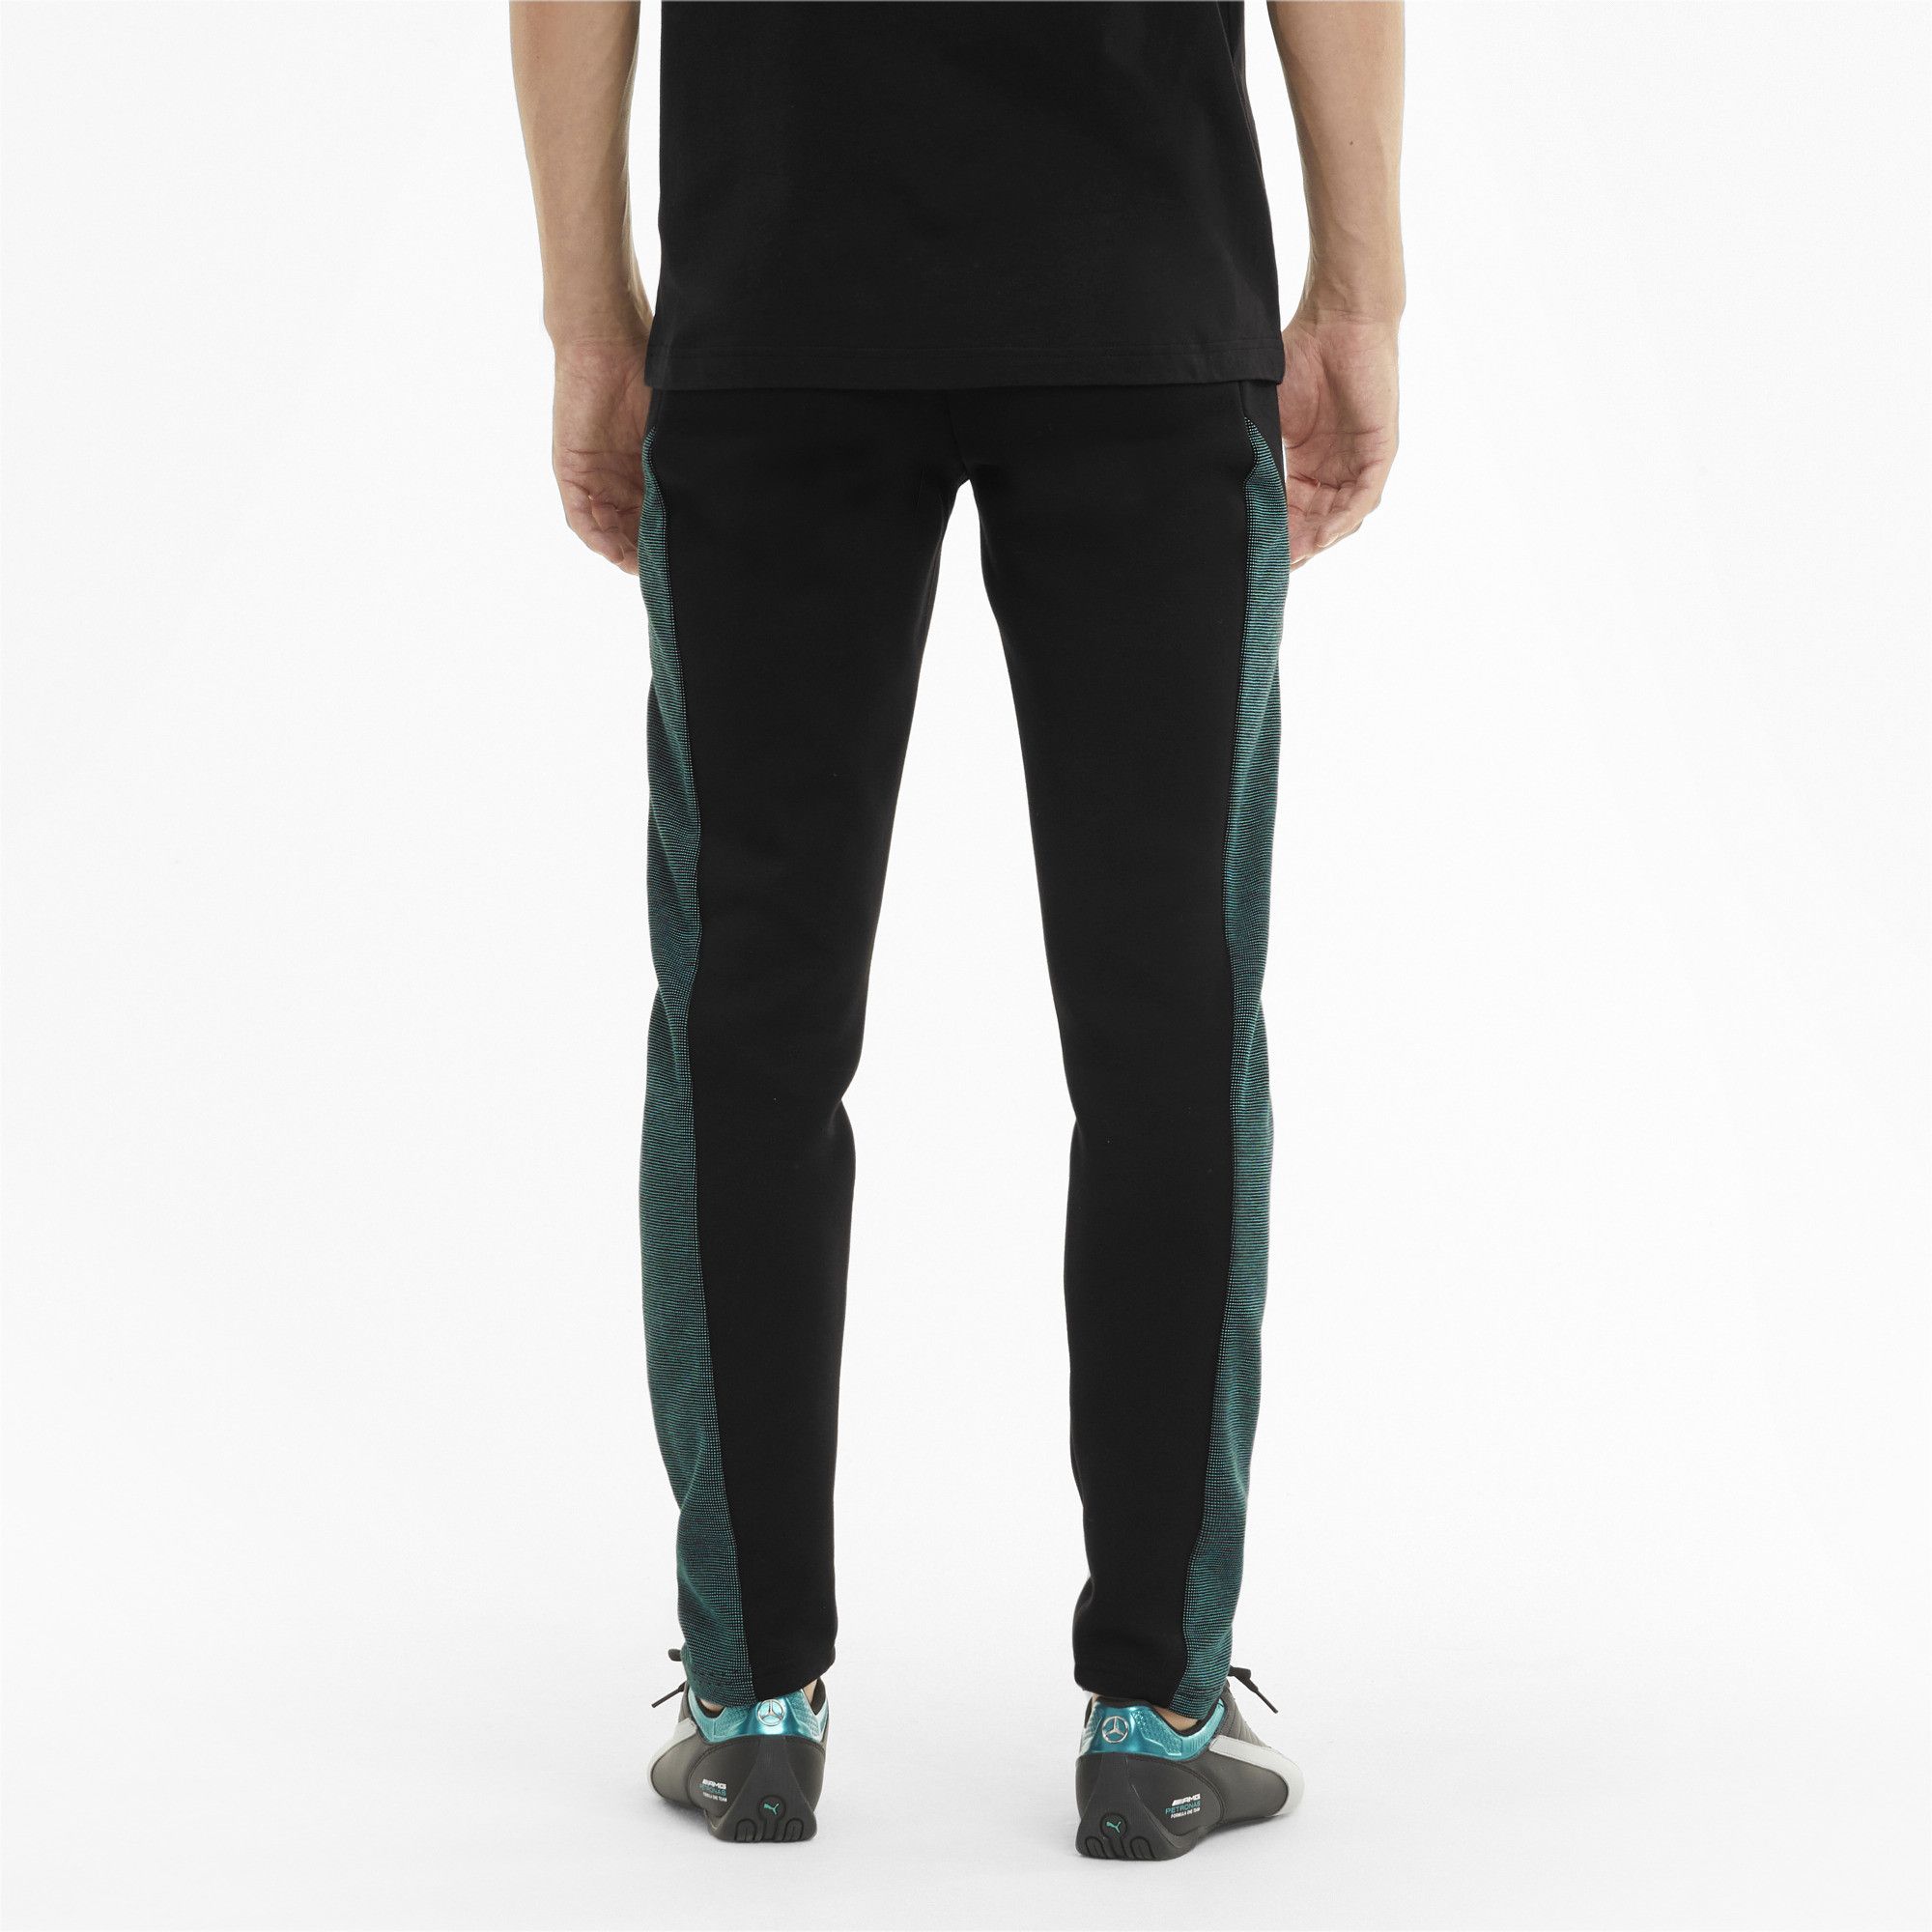 PRODUCT STORY

For high-octane fan style, these two-tone, double-sided sweatpants have a slim fit and showcase the Mercedes-AMG Petronas Motorsport badge and PUMA Cat Logo at the legs. The internal drawcord waistband and welt zip pockets are slick details that enhance the feeling of quality.

FEATURES & BENEFITS

By buying cotton products from PUMA, you’re supporting more sustainable cotton farming. 
DETAILS

Our model is 183 cm tall and is wearing size M
Slim fit
Open cuffs
Mercedes-AMG Petronas F1 badge at leg
PUMA Cat Logo at leg
Cotton and polyester